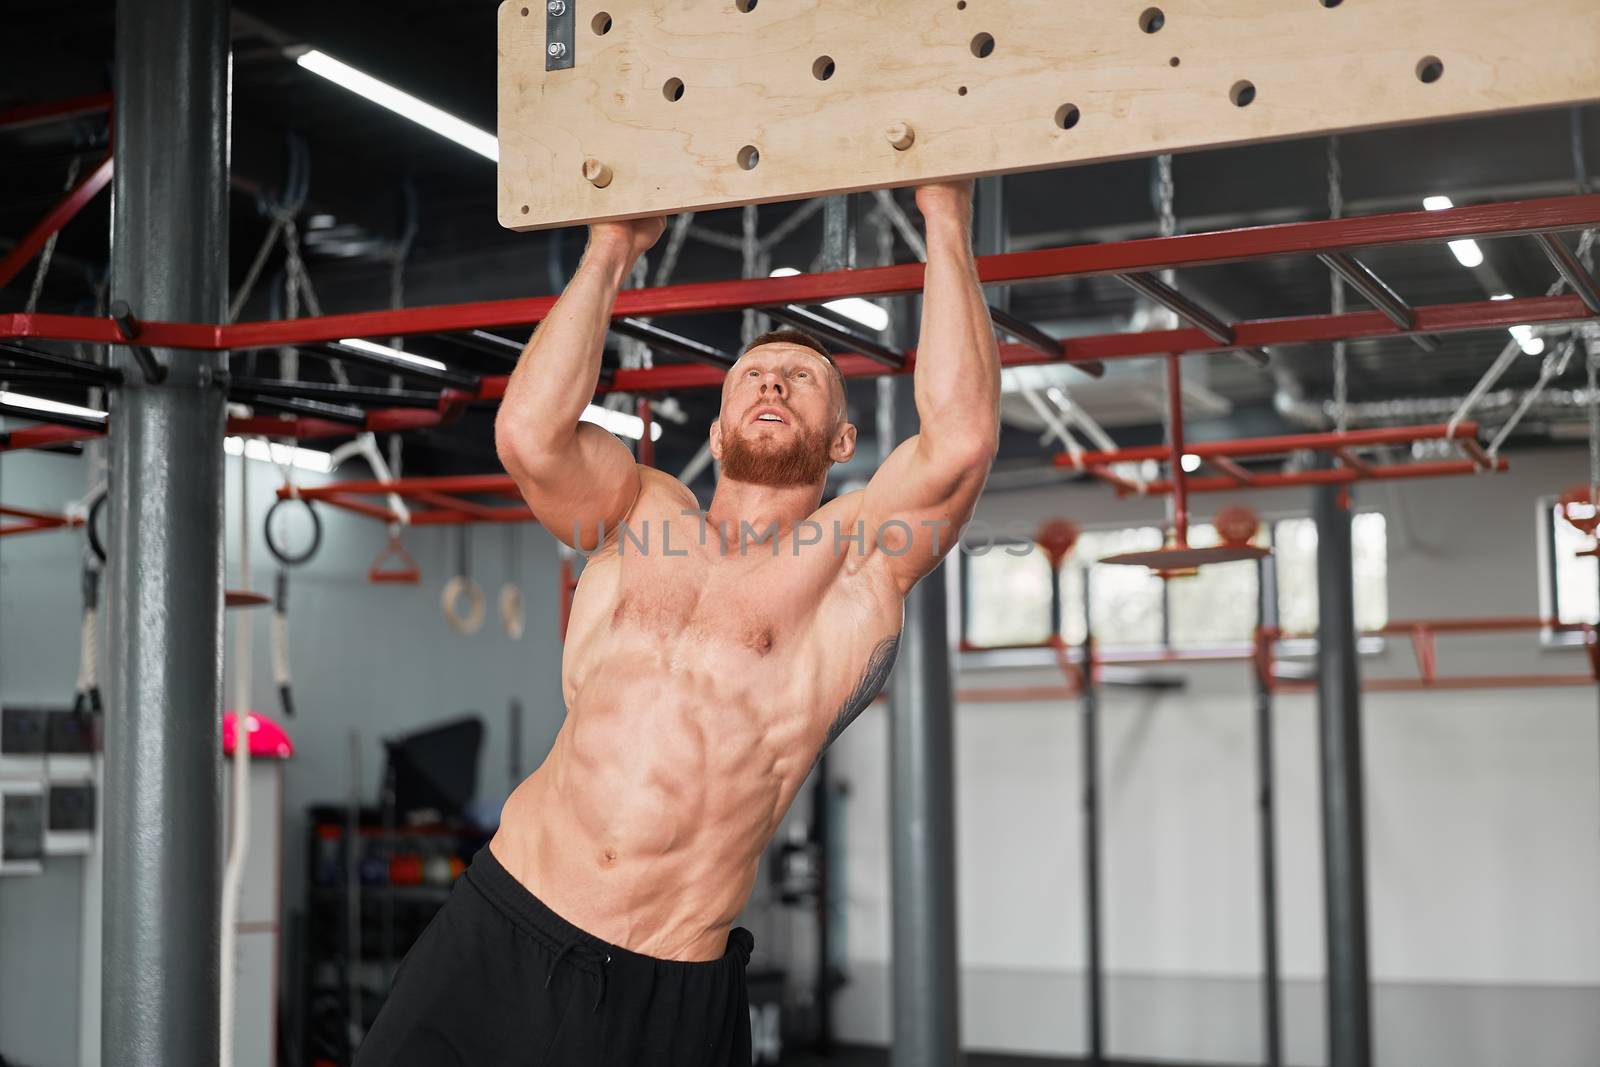 Man climbing pegboard gym athlete training arm strength stamina alpinism indoor. Athlete caucasian guy hanging from his hands wooden campus board warming up to climb Functional Cross training workout